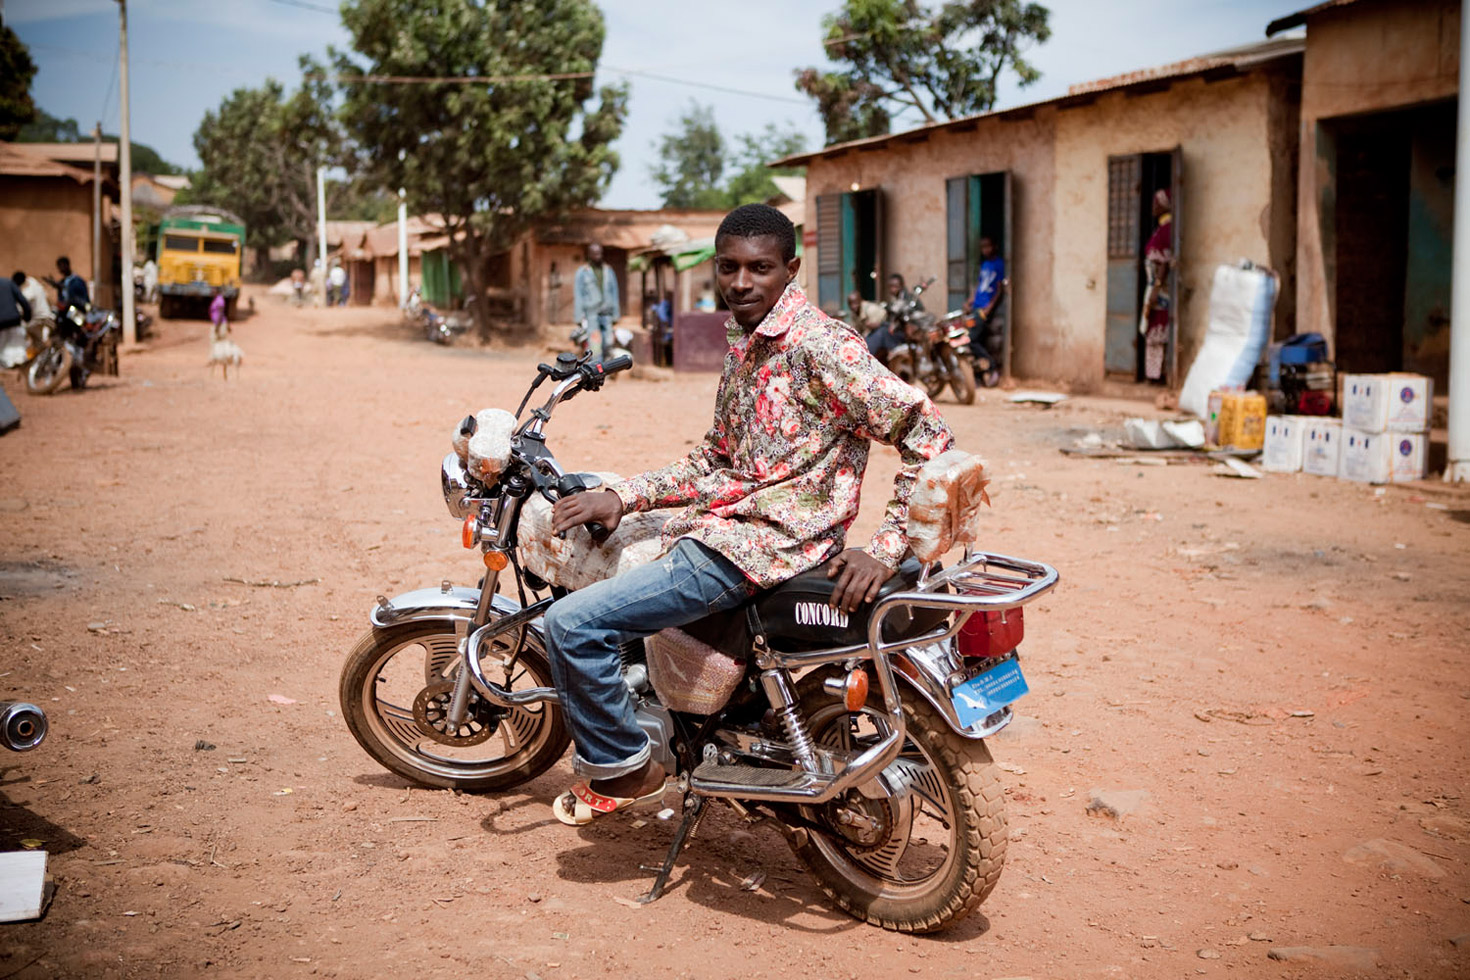 Portrait of 'Ibou,' a motorcycle taxi driver in Maliville in the Fouta Djallon highlands of Guinea. He makes the arduous 60 km, 10 hour ride down the steep, rock-strewn paths of Fouta to Senegal, up to three times a week. The Guinean roads are reported as being some of the worst in the world.